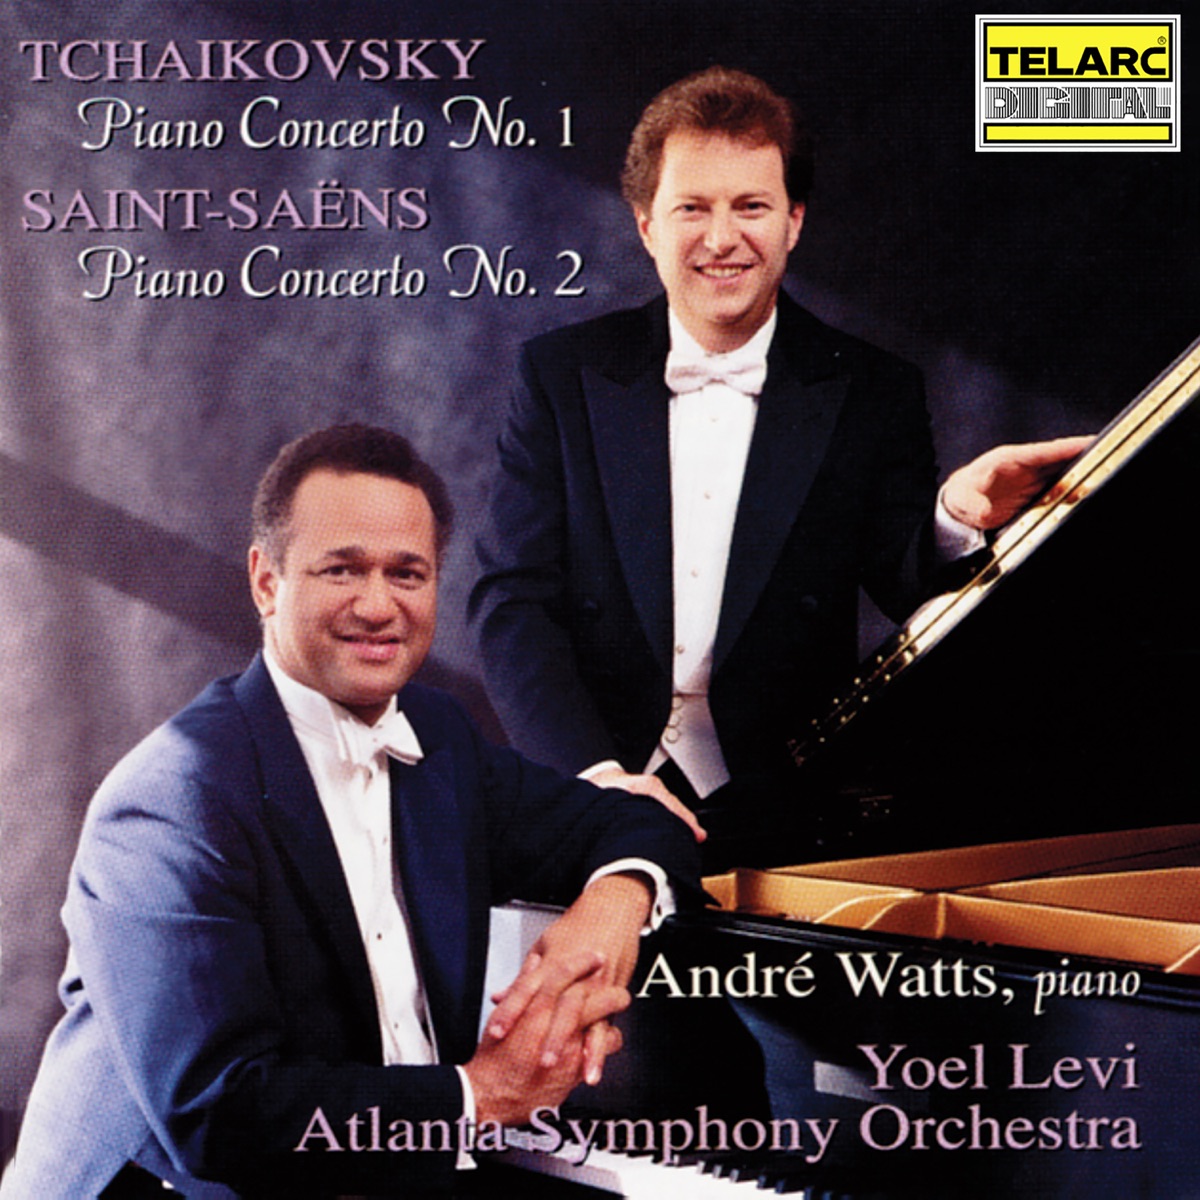 Tchaikovsky: Piano Concerto No. 1 in B-Flat Minor, Op. 23, TH 55 - Saint- Saëns: Piano Concerto No. 2 in G Minor, Op. 22, R. 190 - Album by Yoel  Levi, André Watts